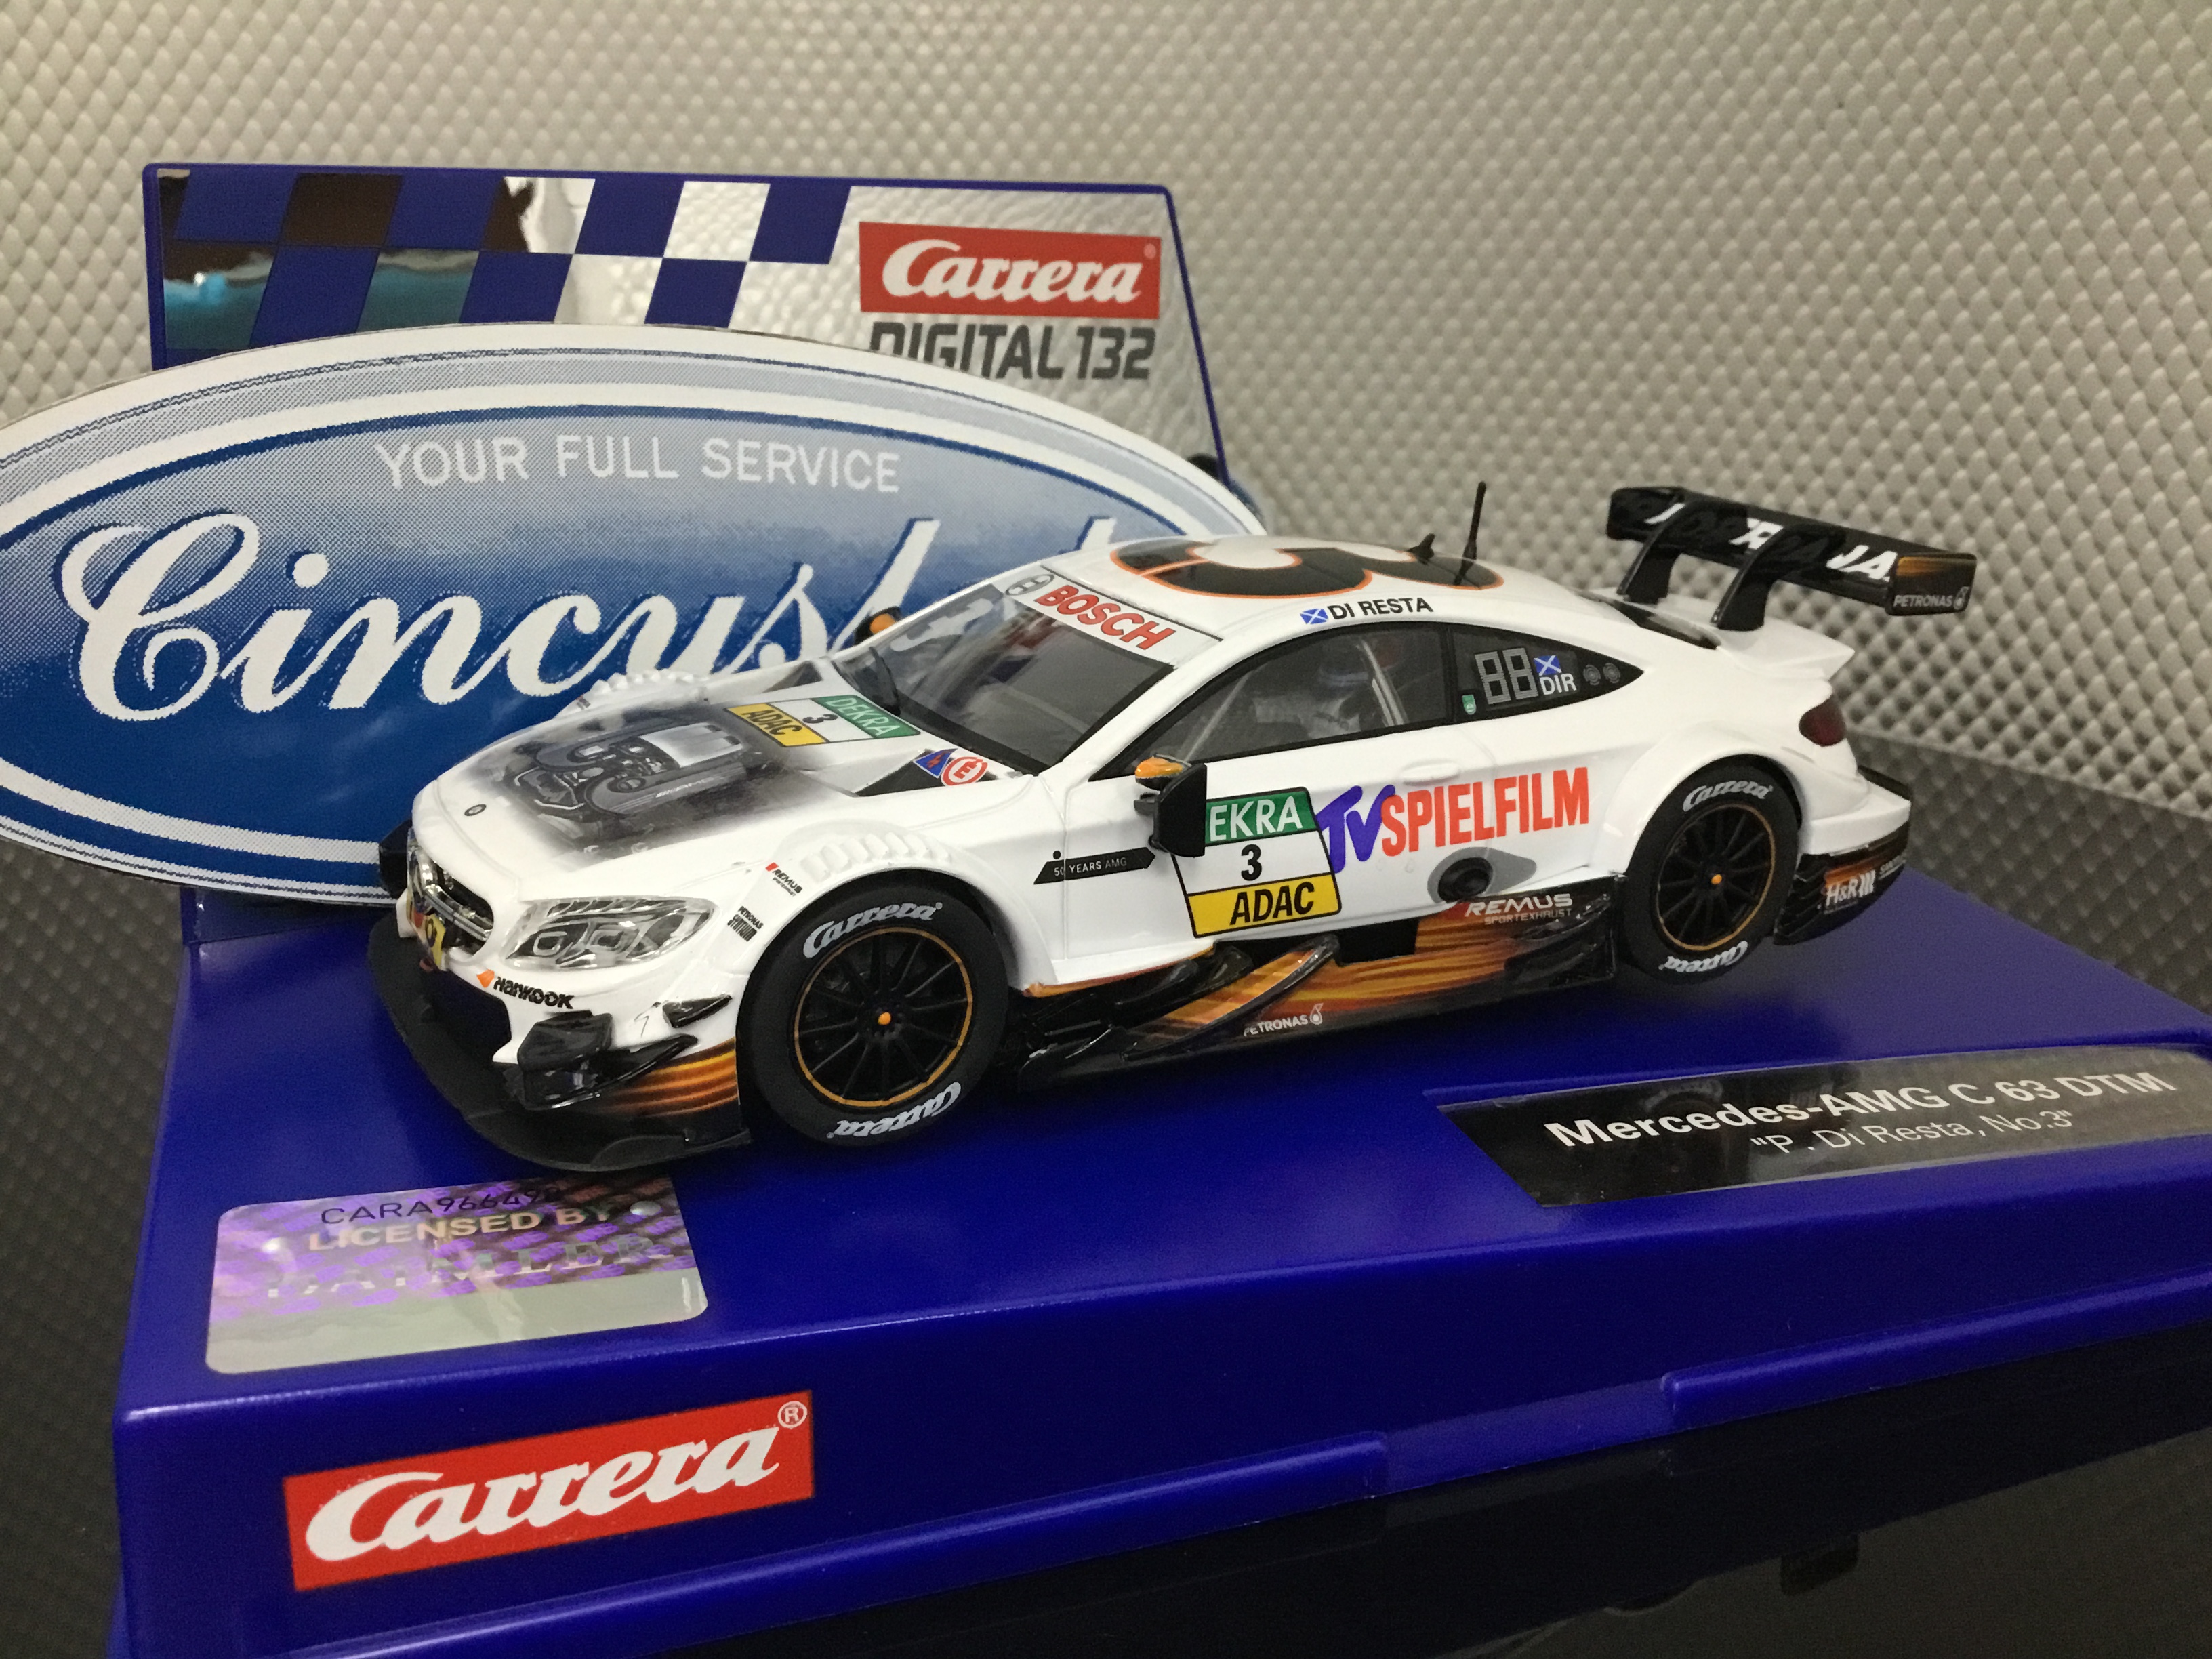 Carrera 27573 Mercedes DTM 1/32 Slot Car Brand New Factory Free Shipping Special 